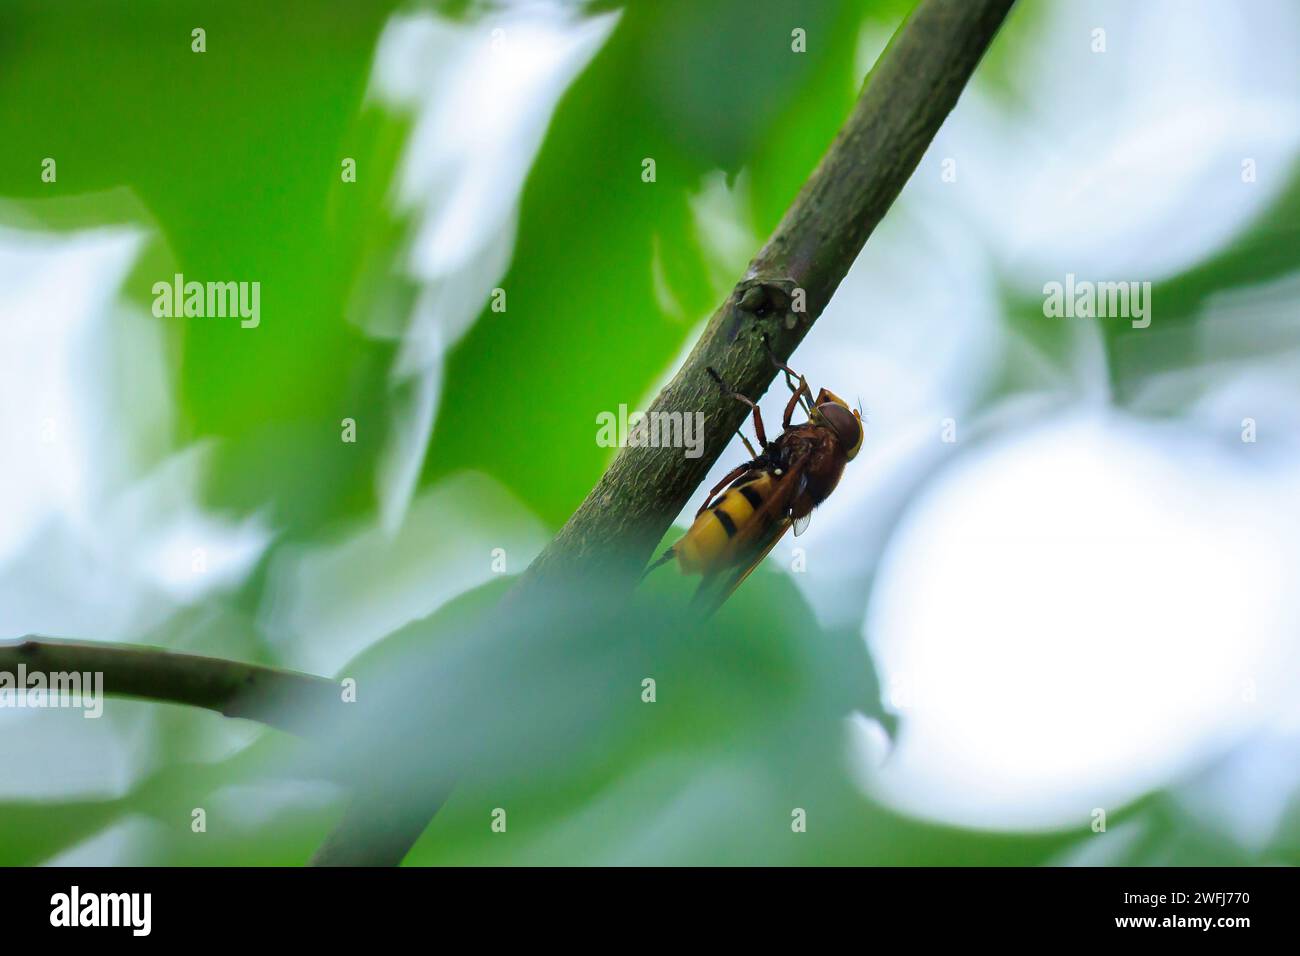 Closeup of a Volucella zonaria, the hornet mimic hoverfly, feeding nectar on white flowers Stock Photo